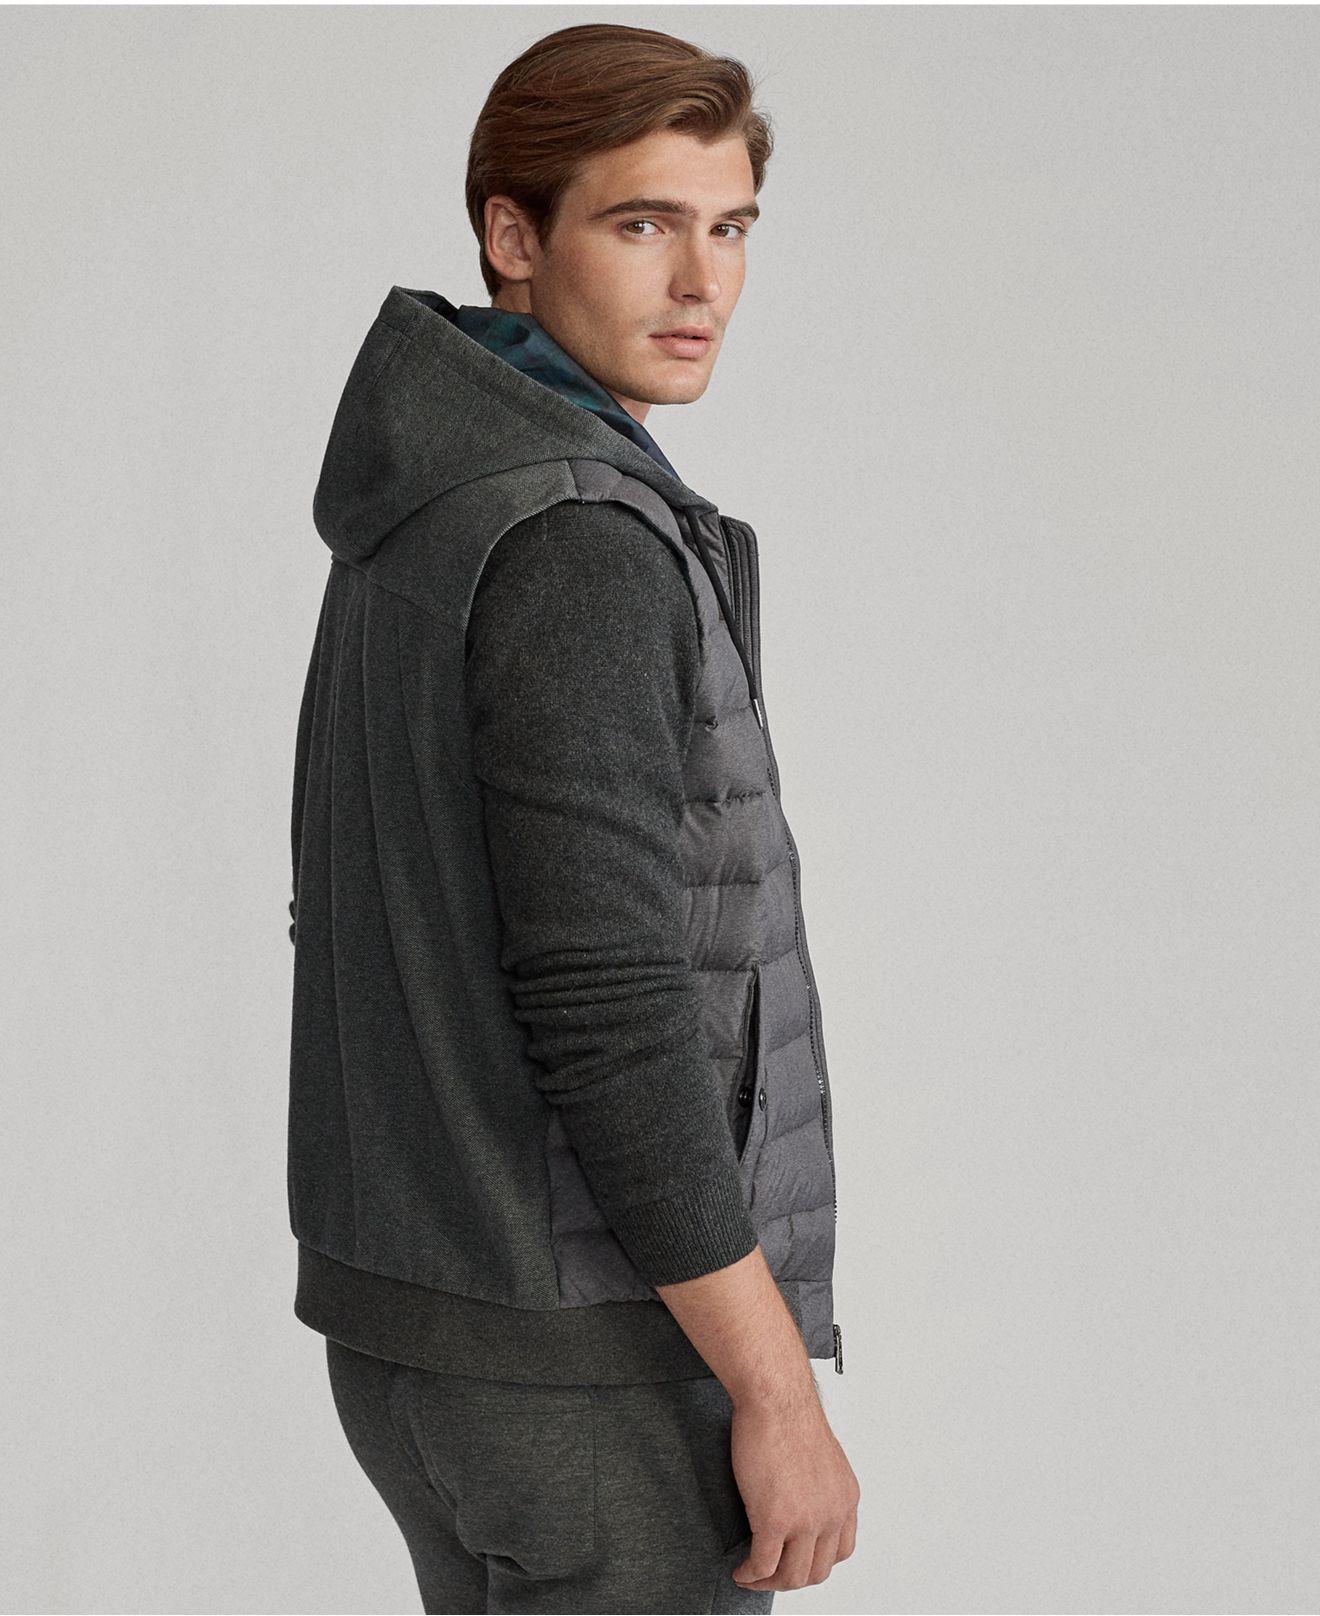 Polo Ralph Lauren Synthetic Double-knit Hooded Vest in Gray for Men - Lyst